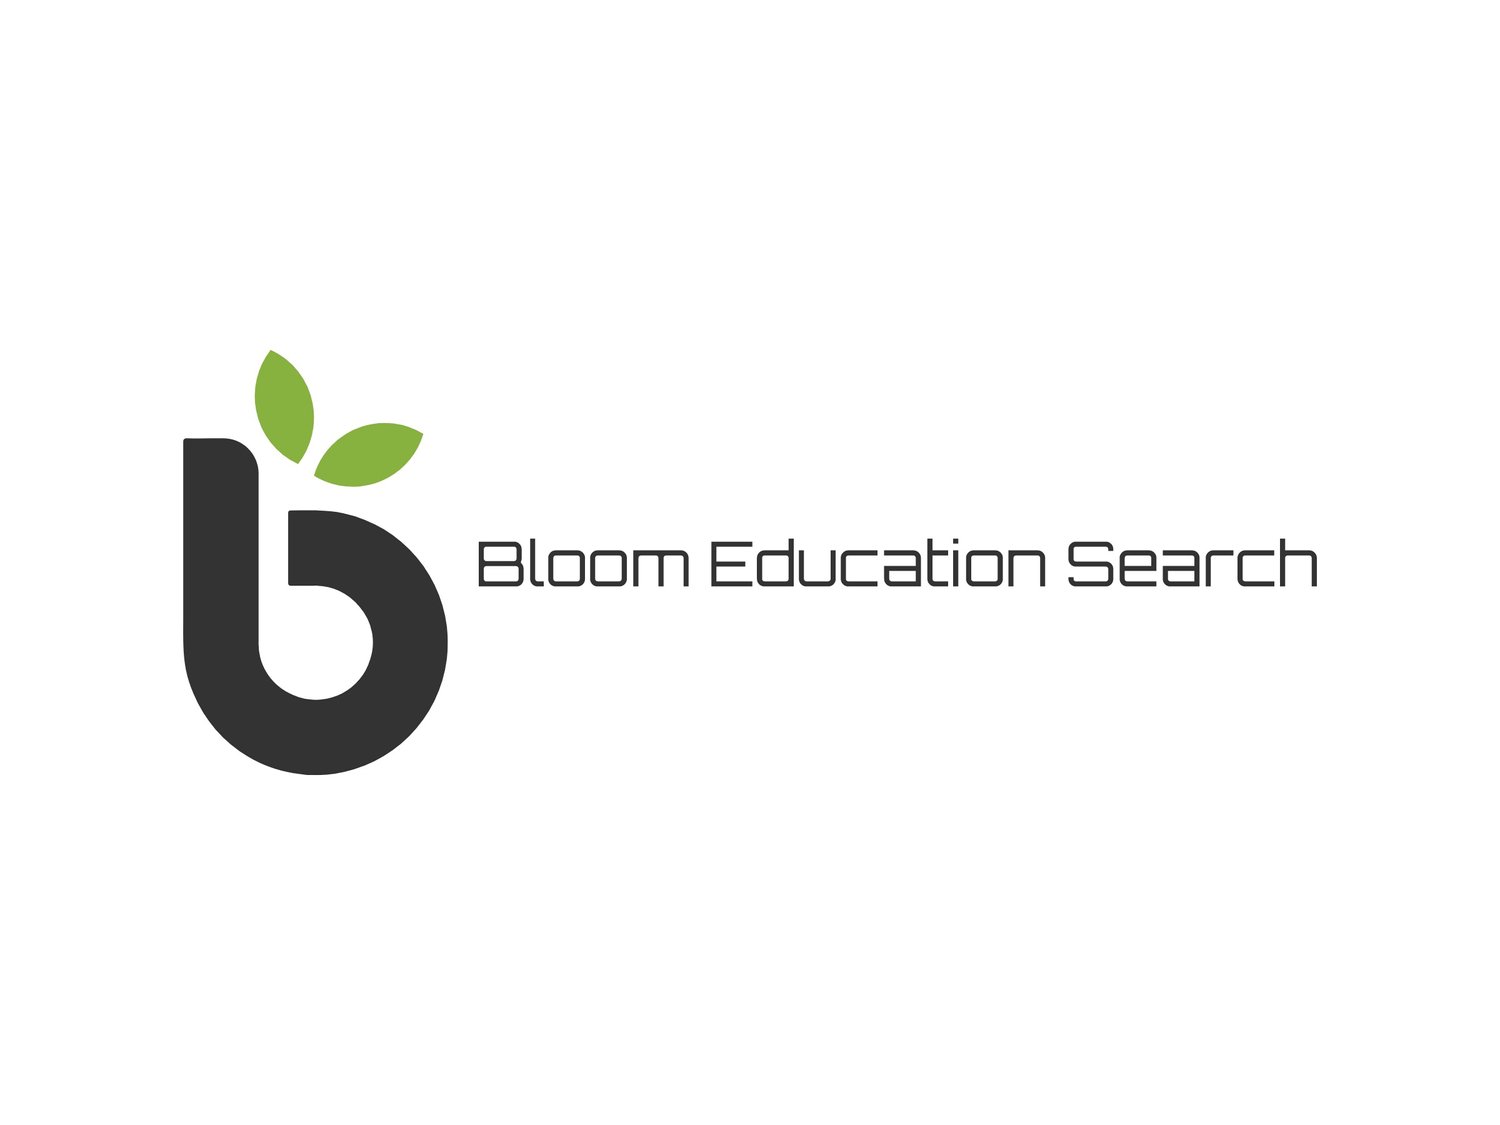 Bloom Education Search